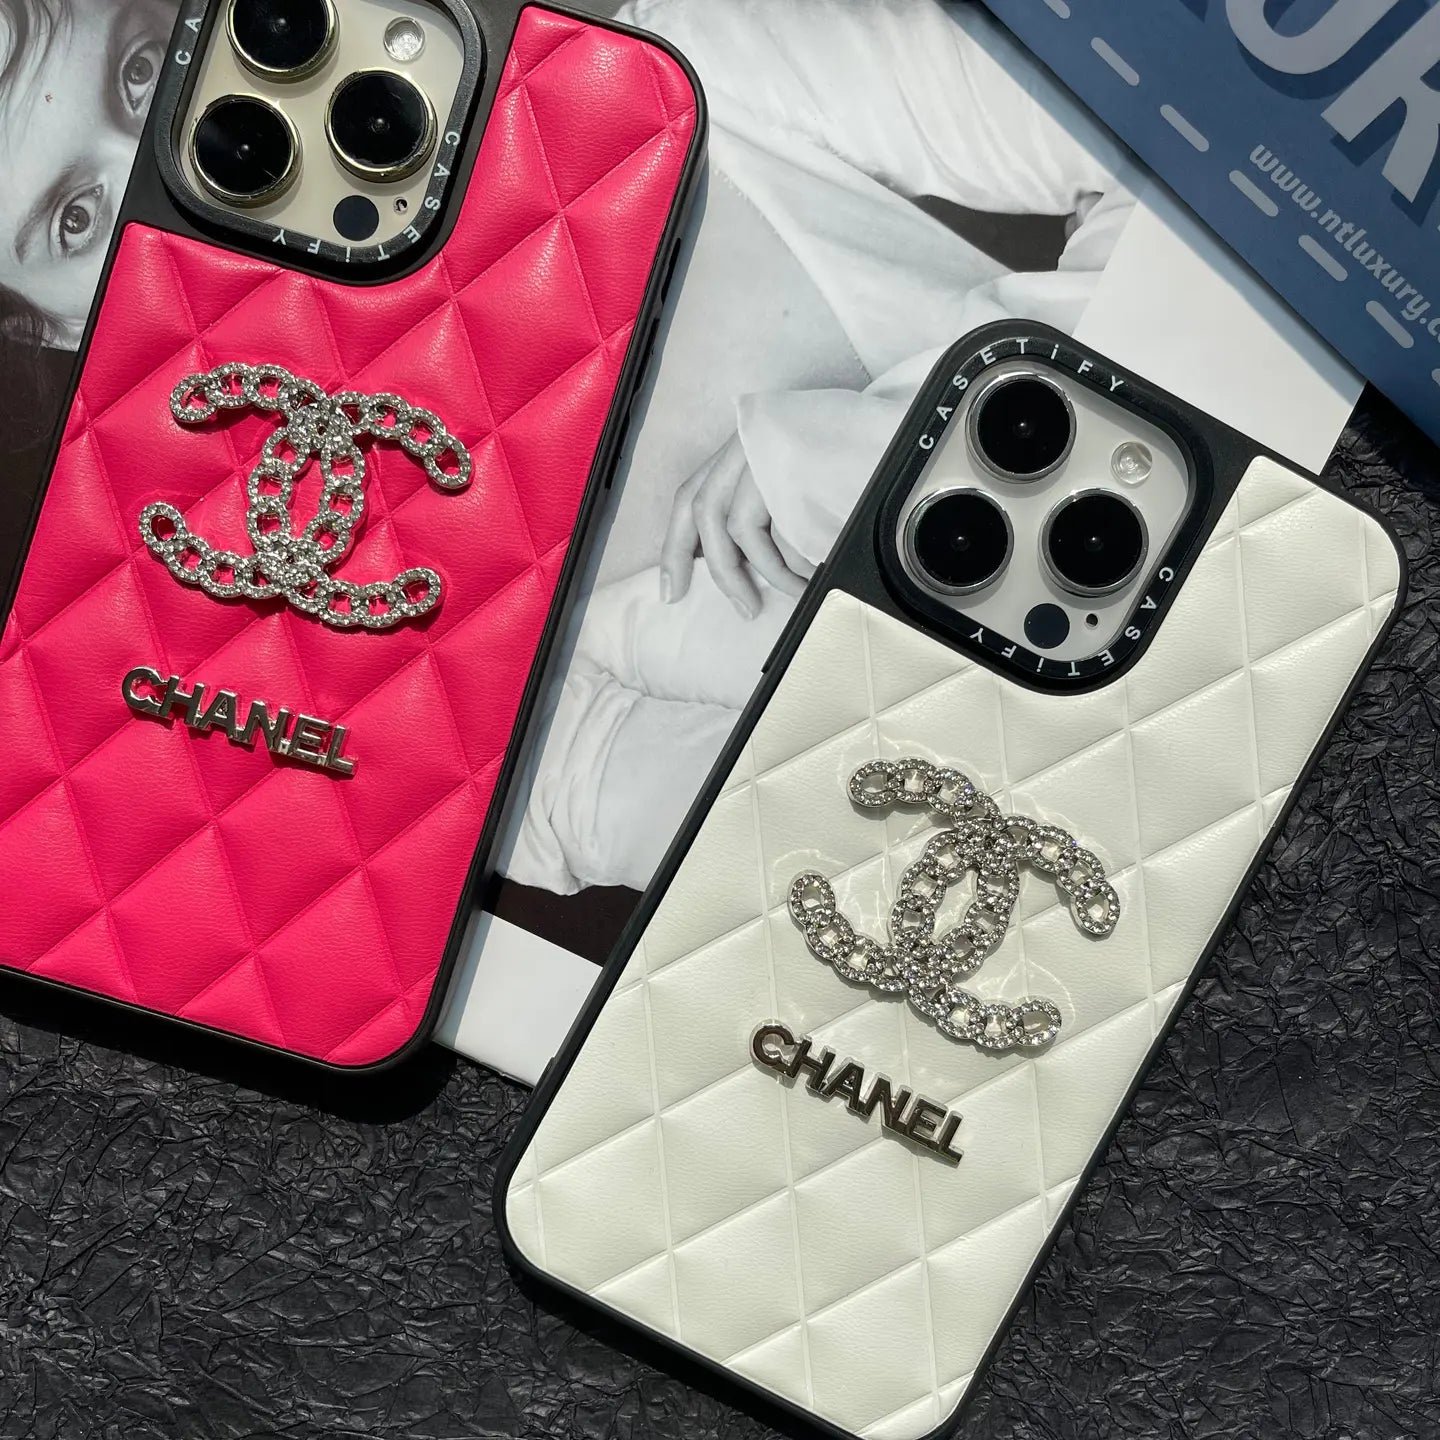 Collab X Colorful Shining Channel Phone Case For iPhone